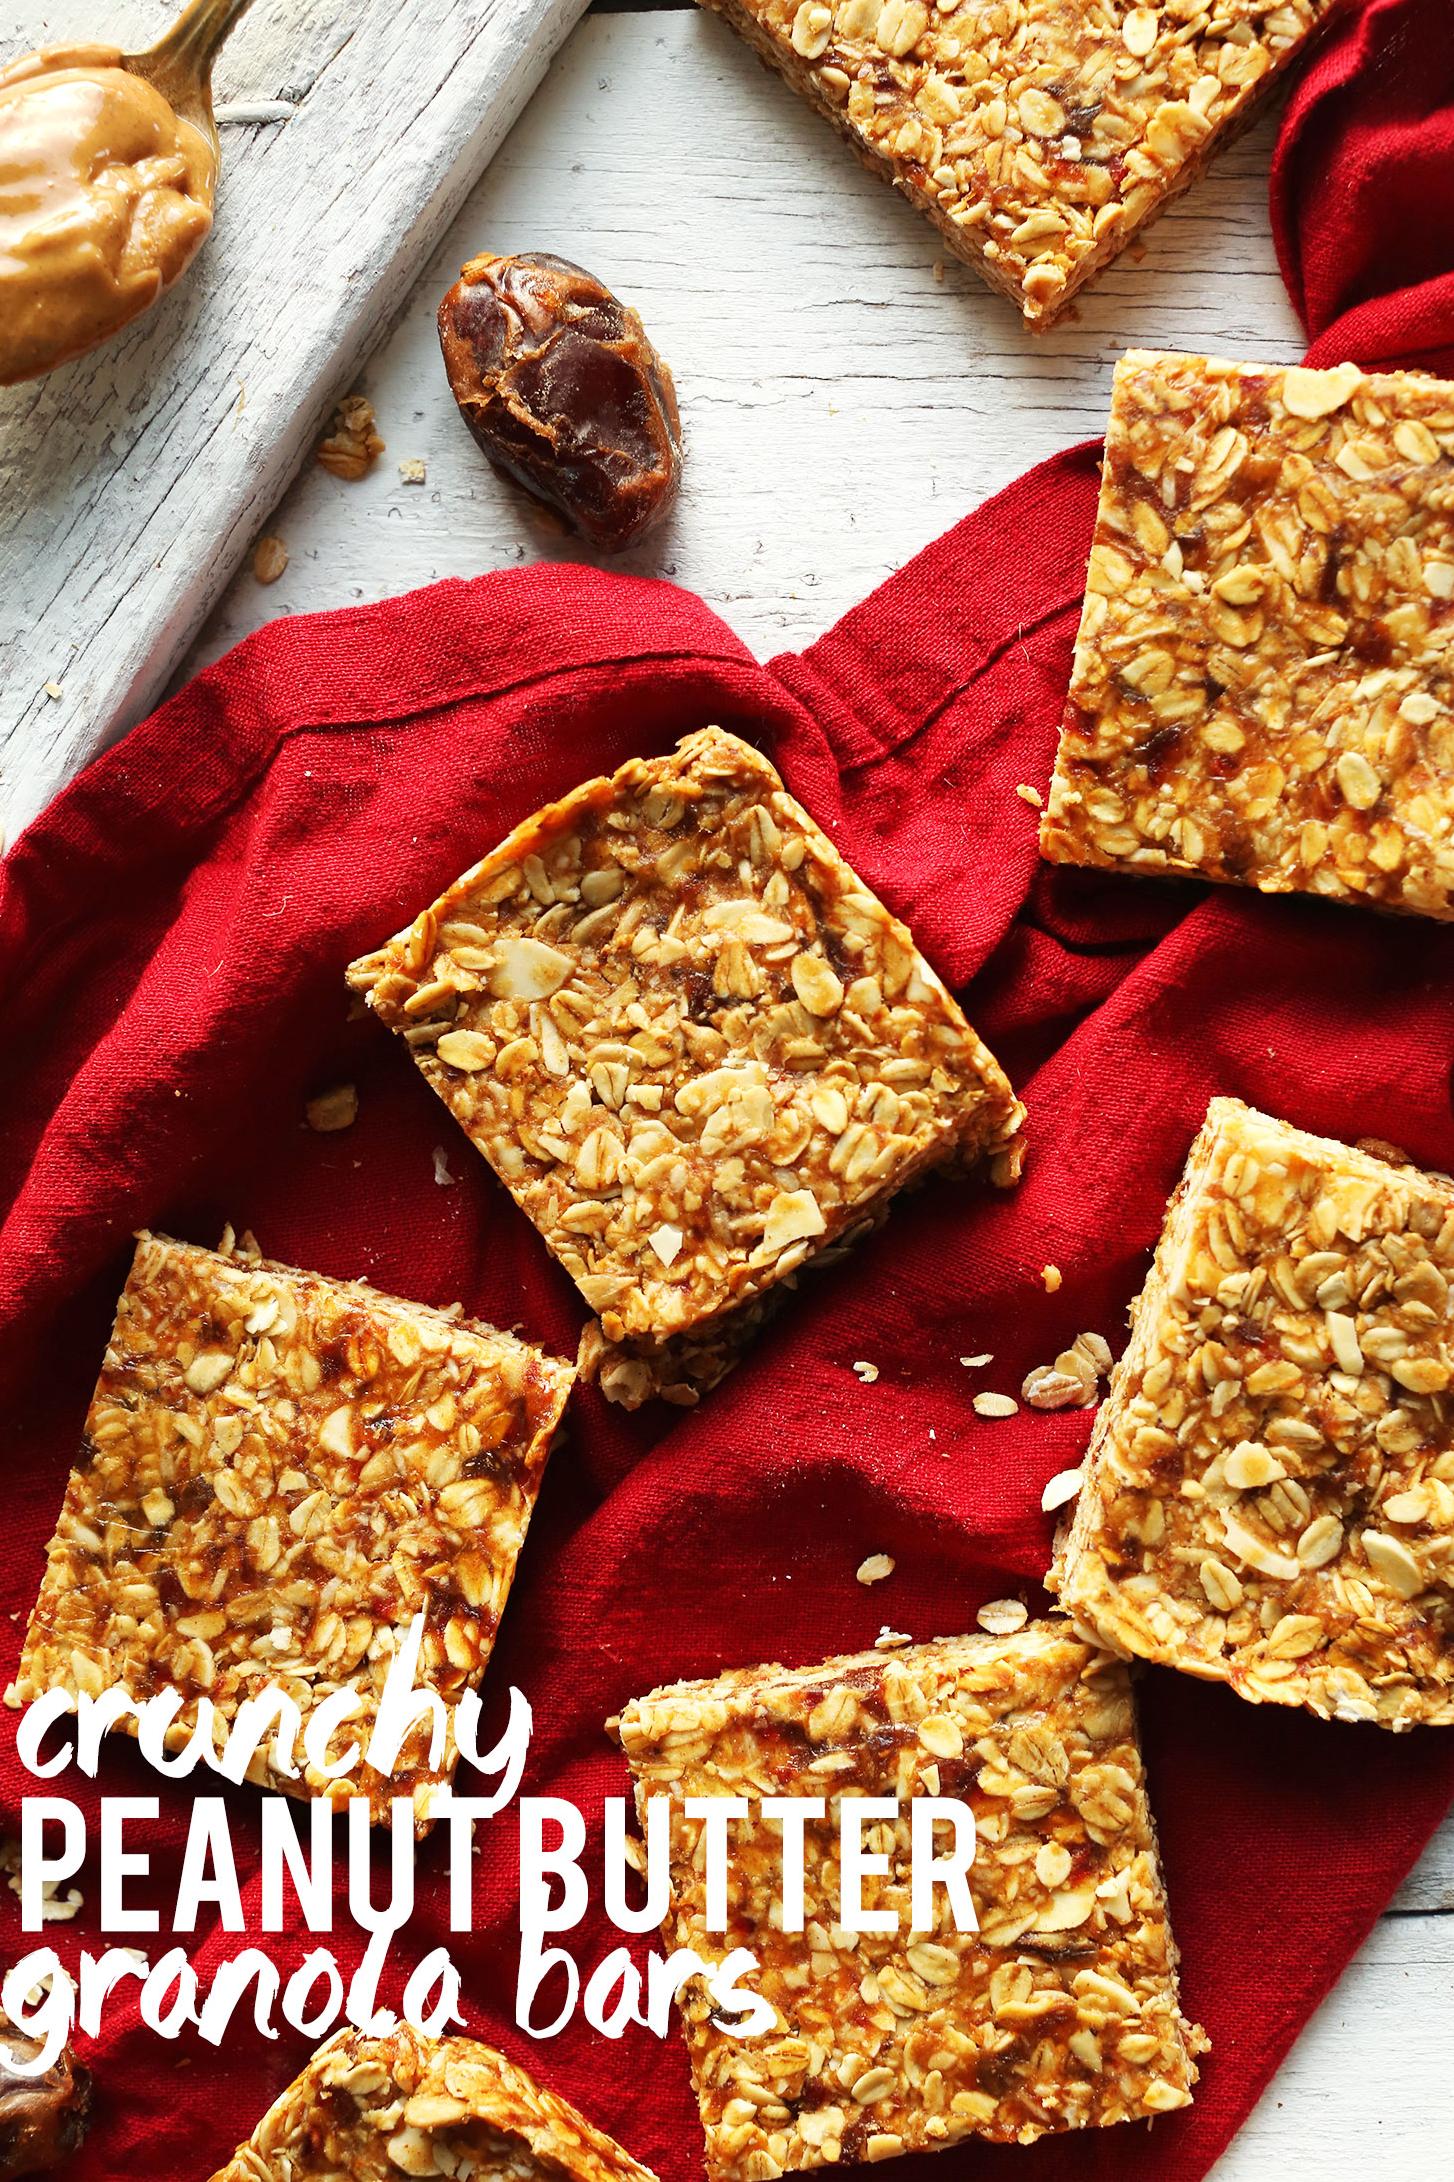  Crunchy and nutty, these granola bars are sure to be a crowd pleaser